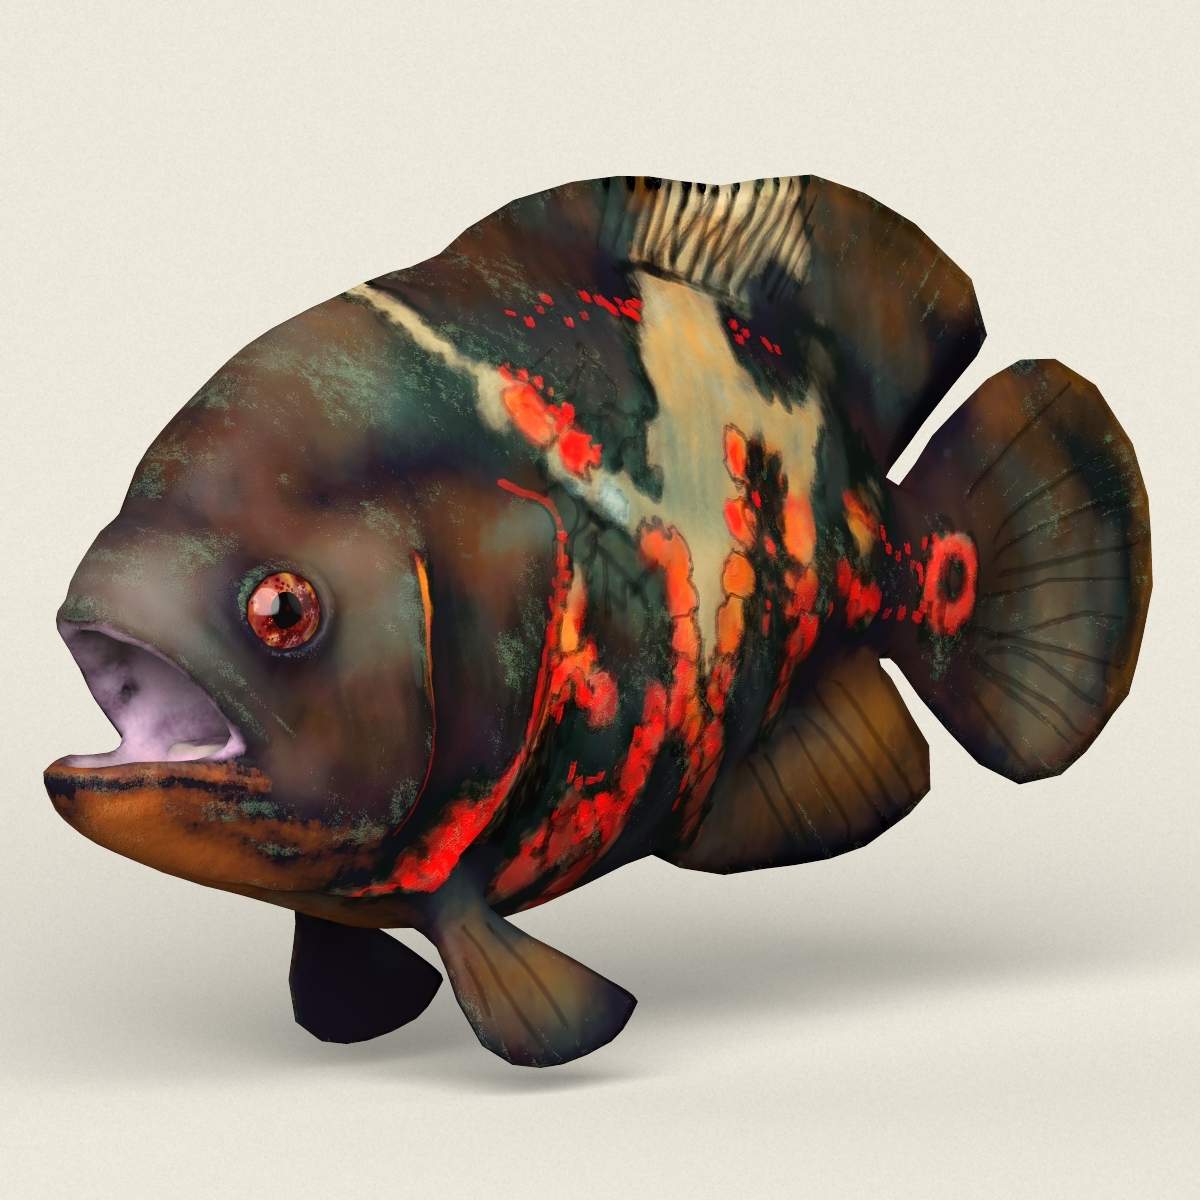 picture of an oscar fish